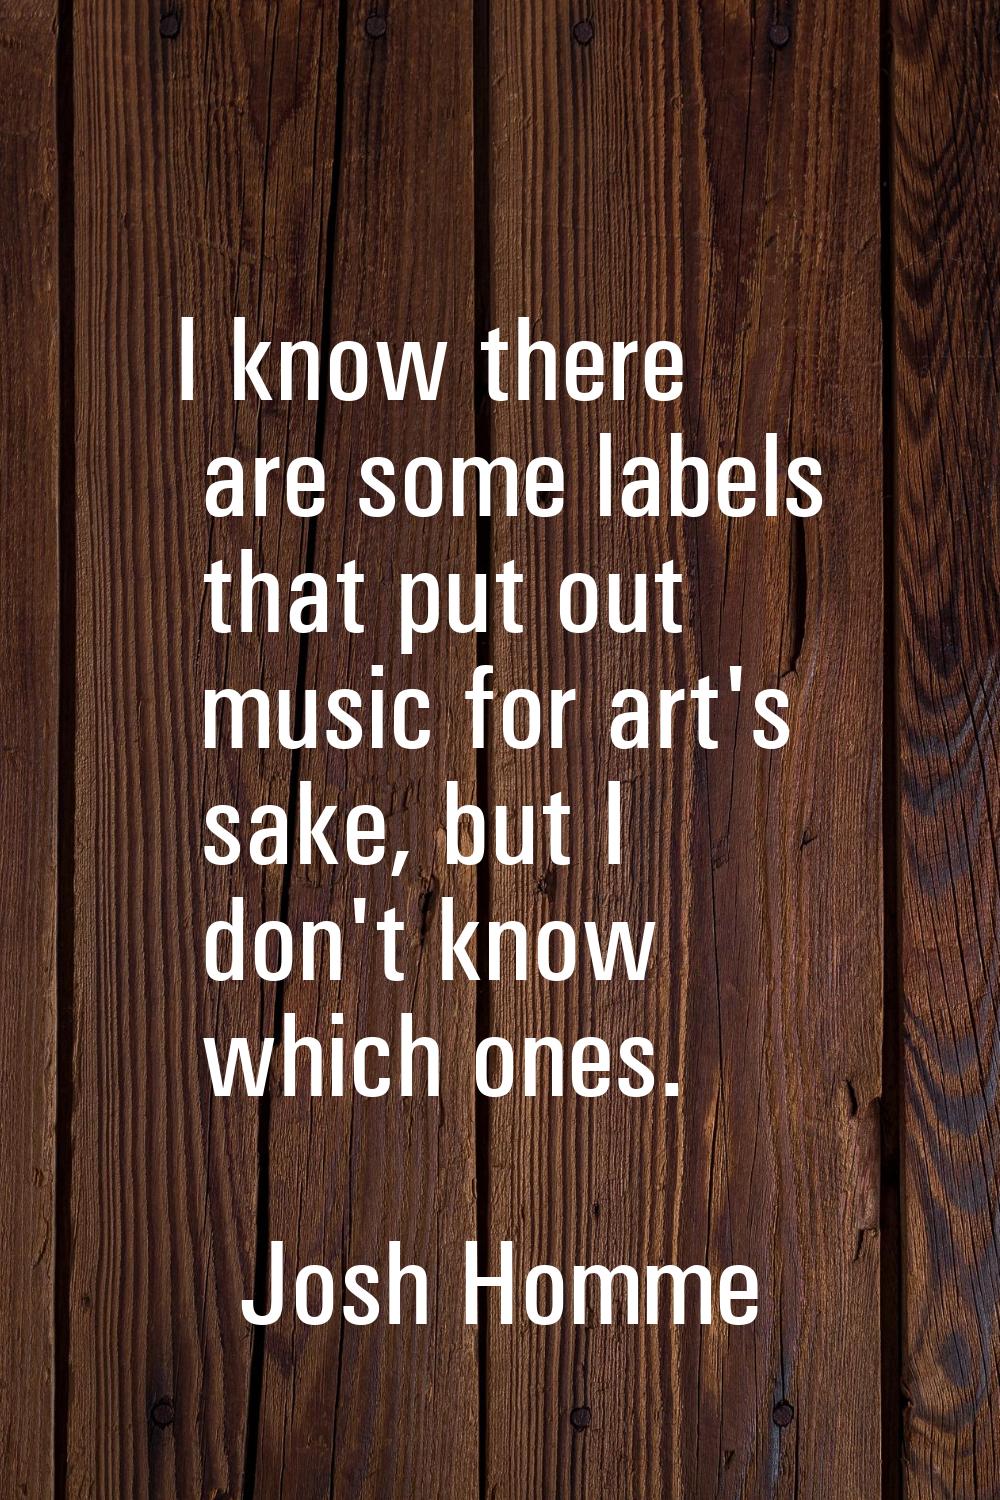 I know there are some labels that put out music for art's sake, but I don't know which ones.